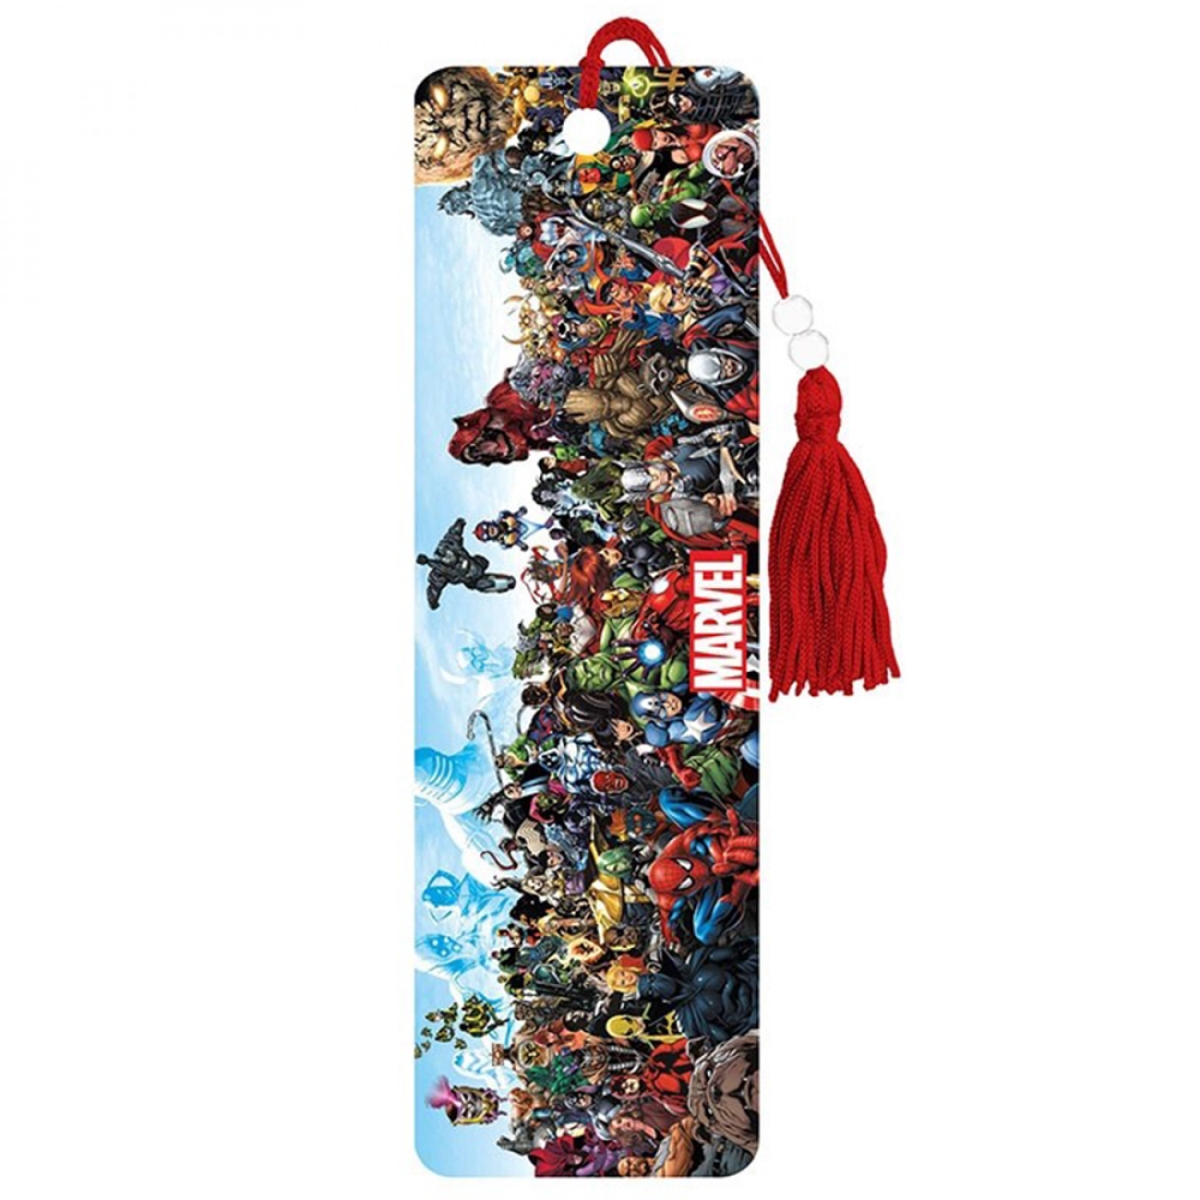 Picture of Avengers 822526 Marvel Universe Characters Lineup Bookmark